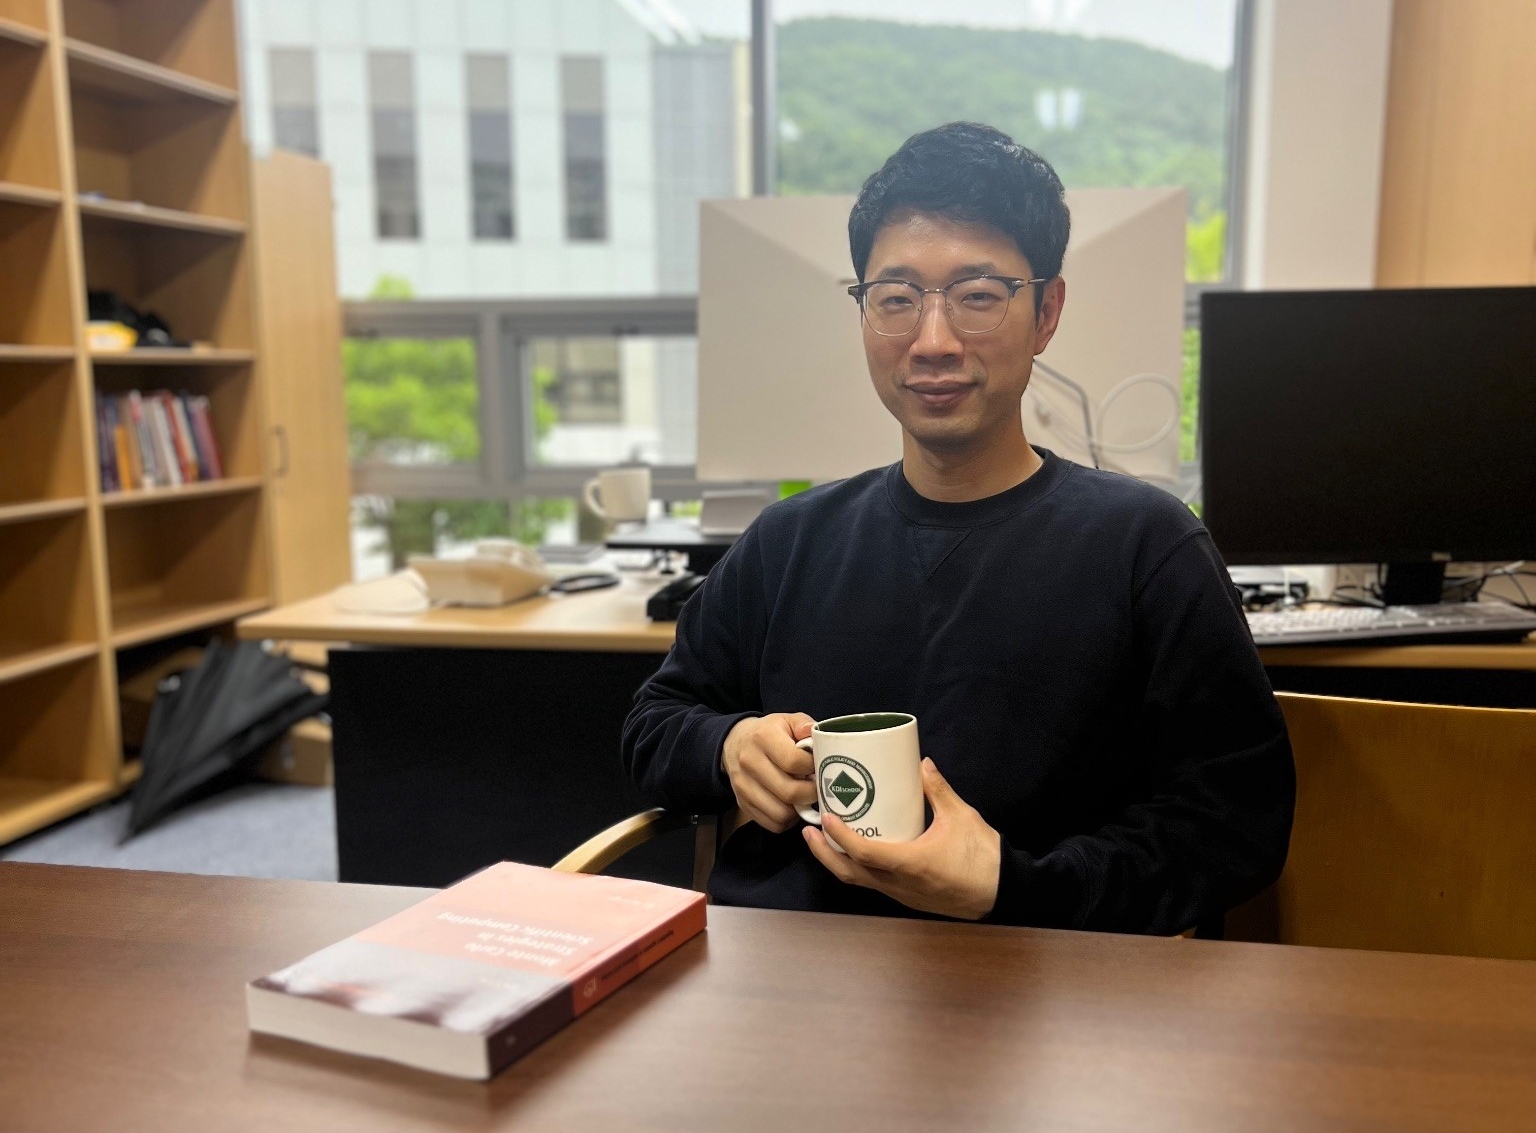 New Professor in Town: Getting to Know Professor ByungKoo Kim